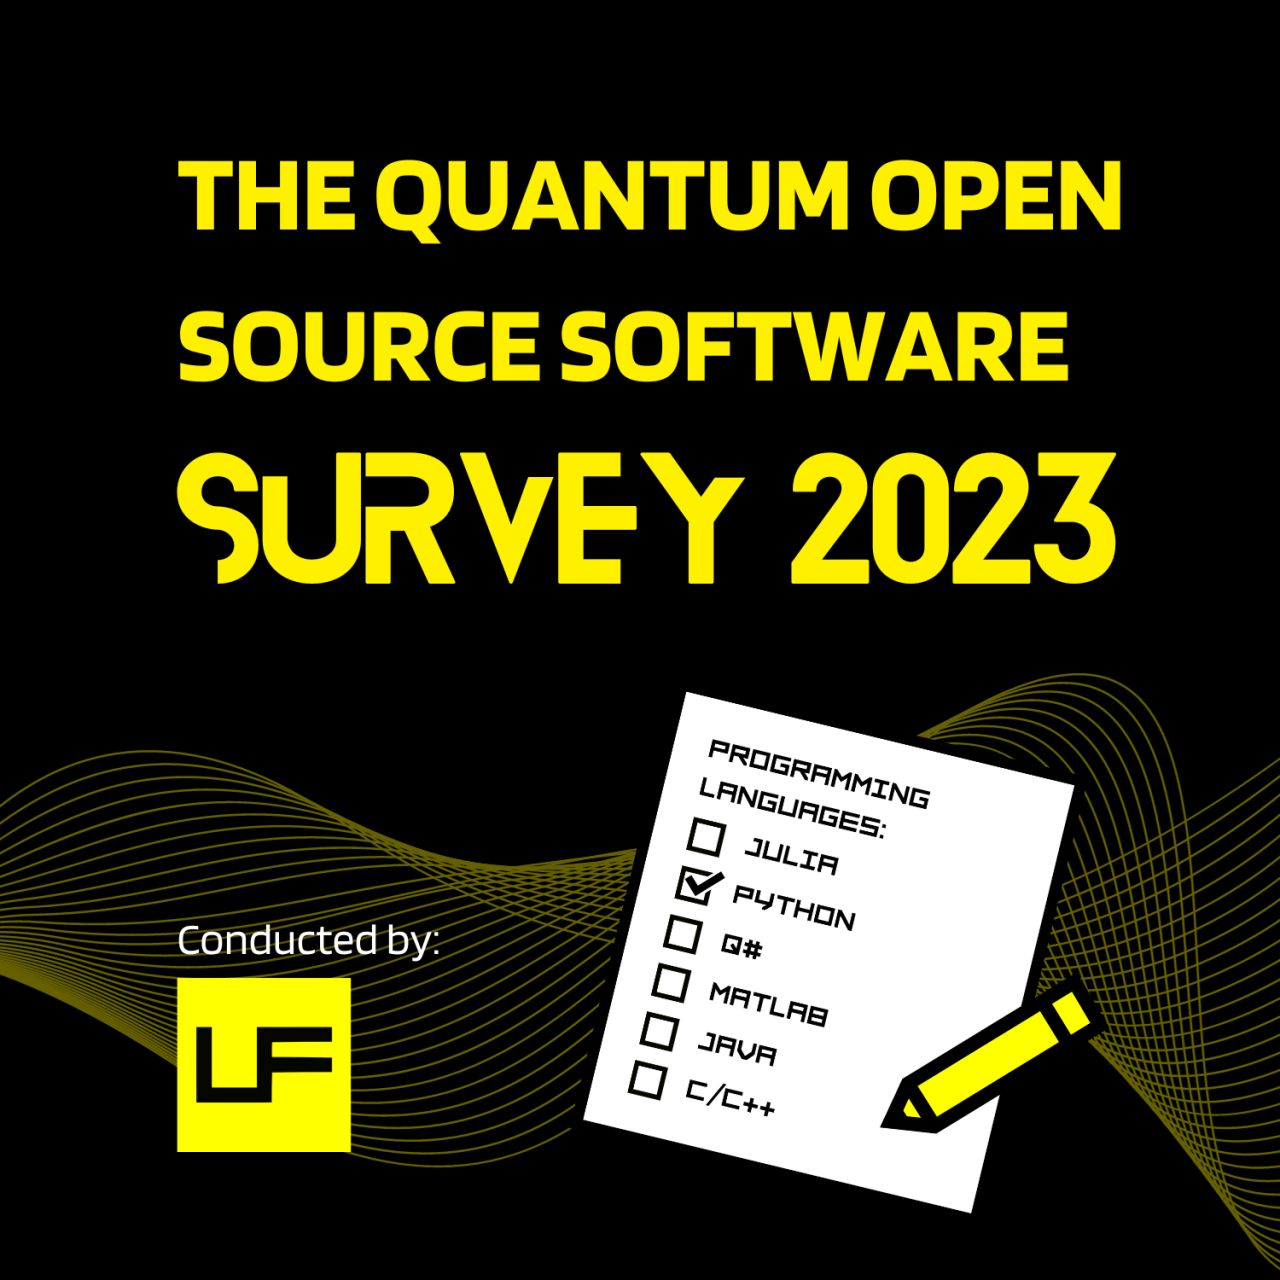 Take the Quantum Open Source Software Survey